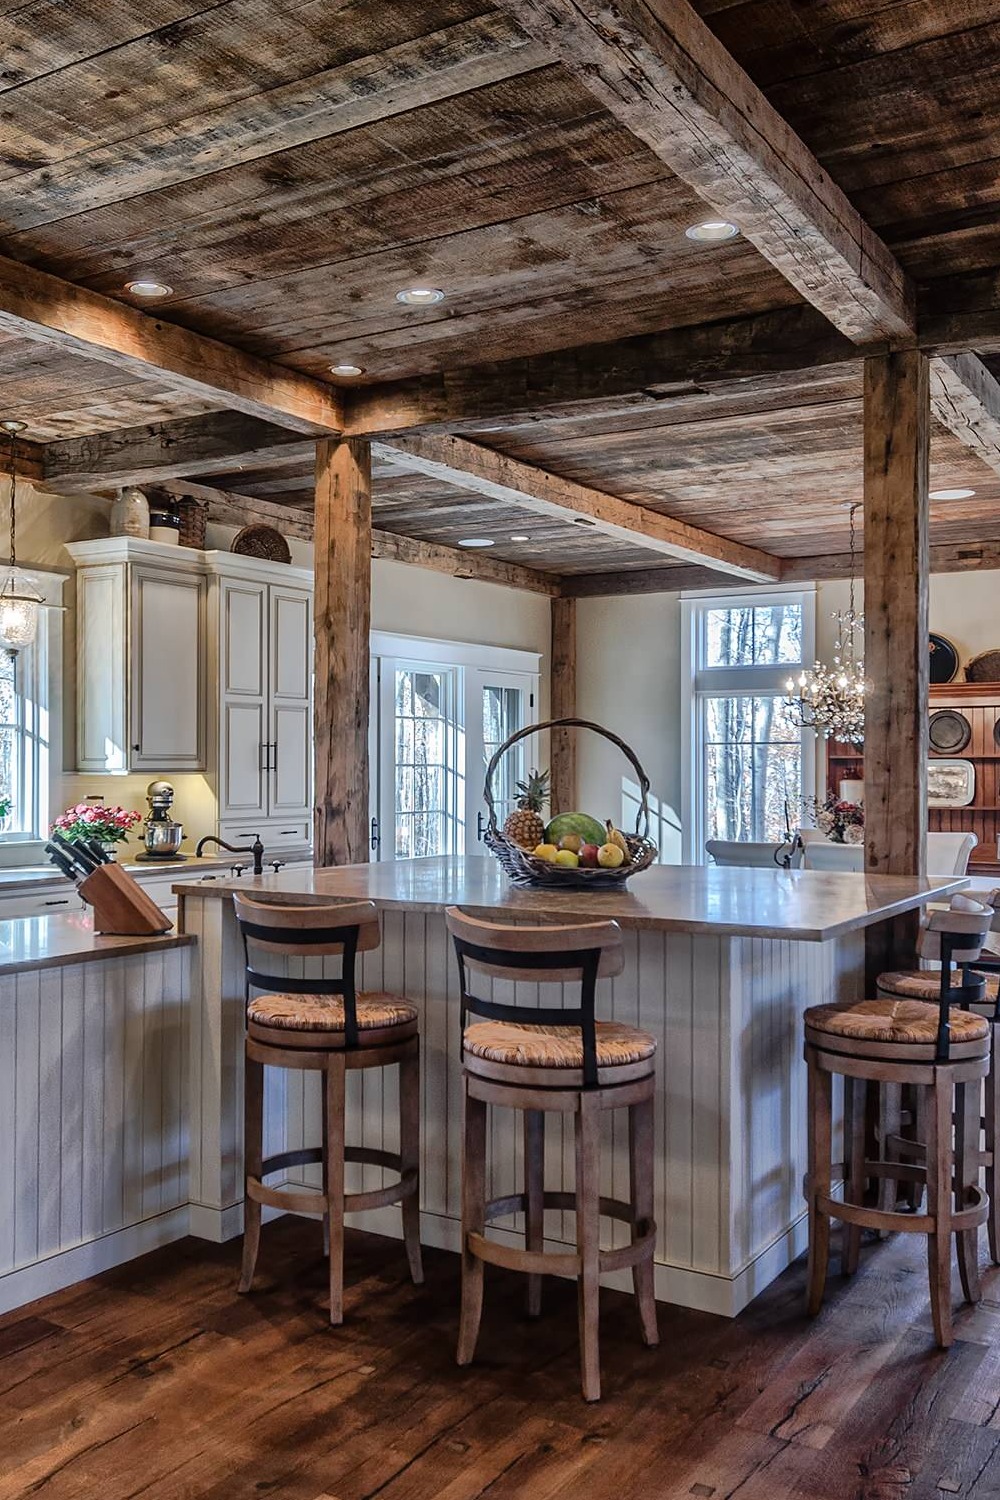 Rustic Kitchens Wooden Cabinets Wooden Ceiling Kitchen Ideas